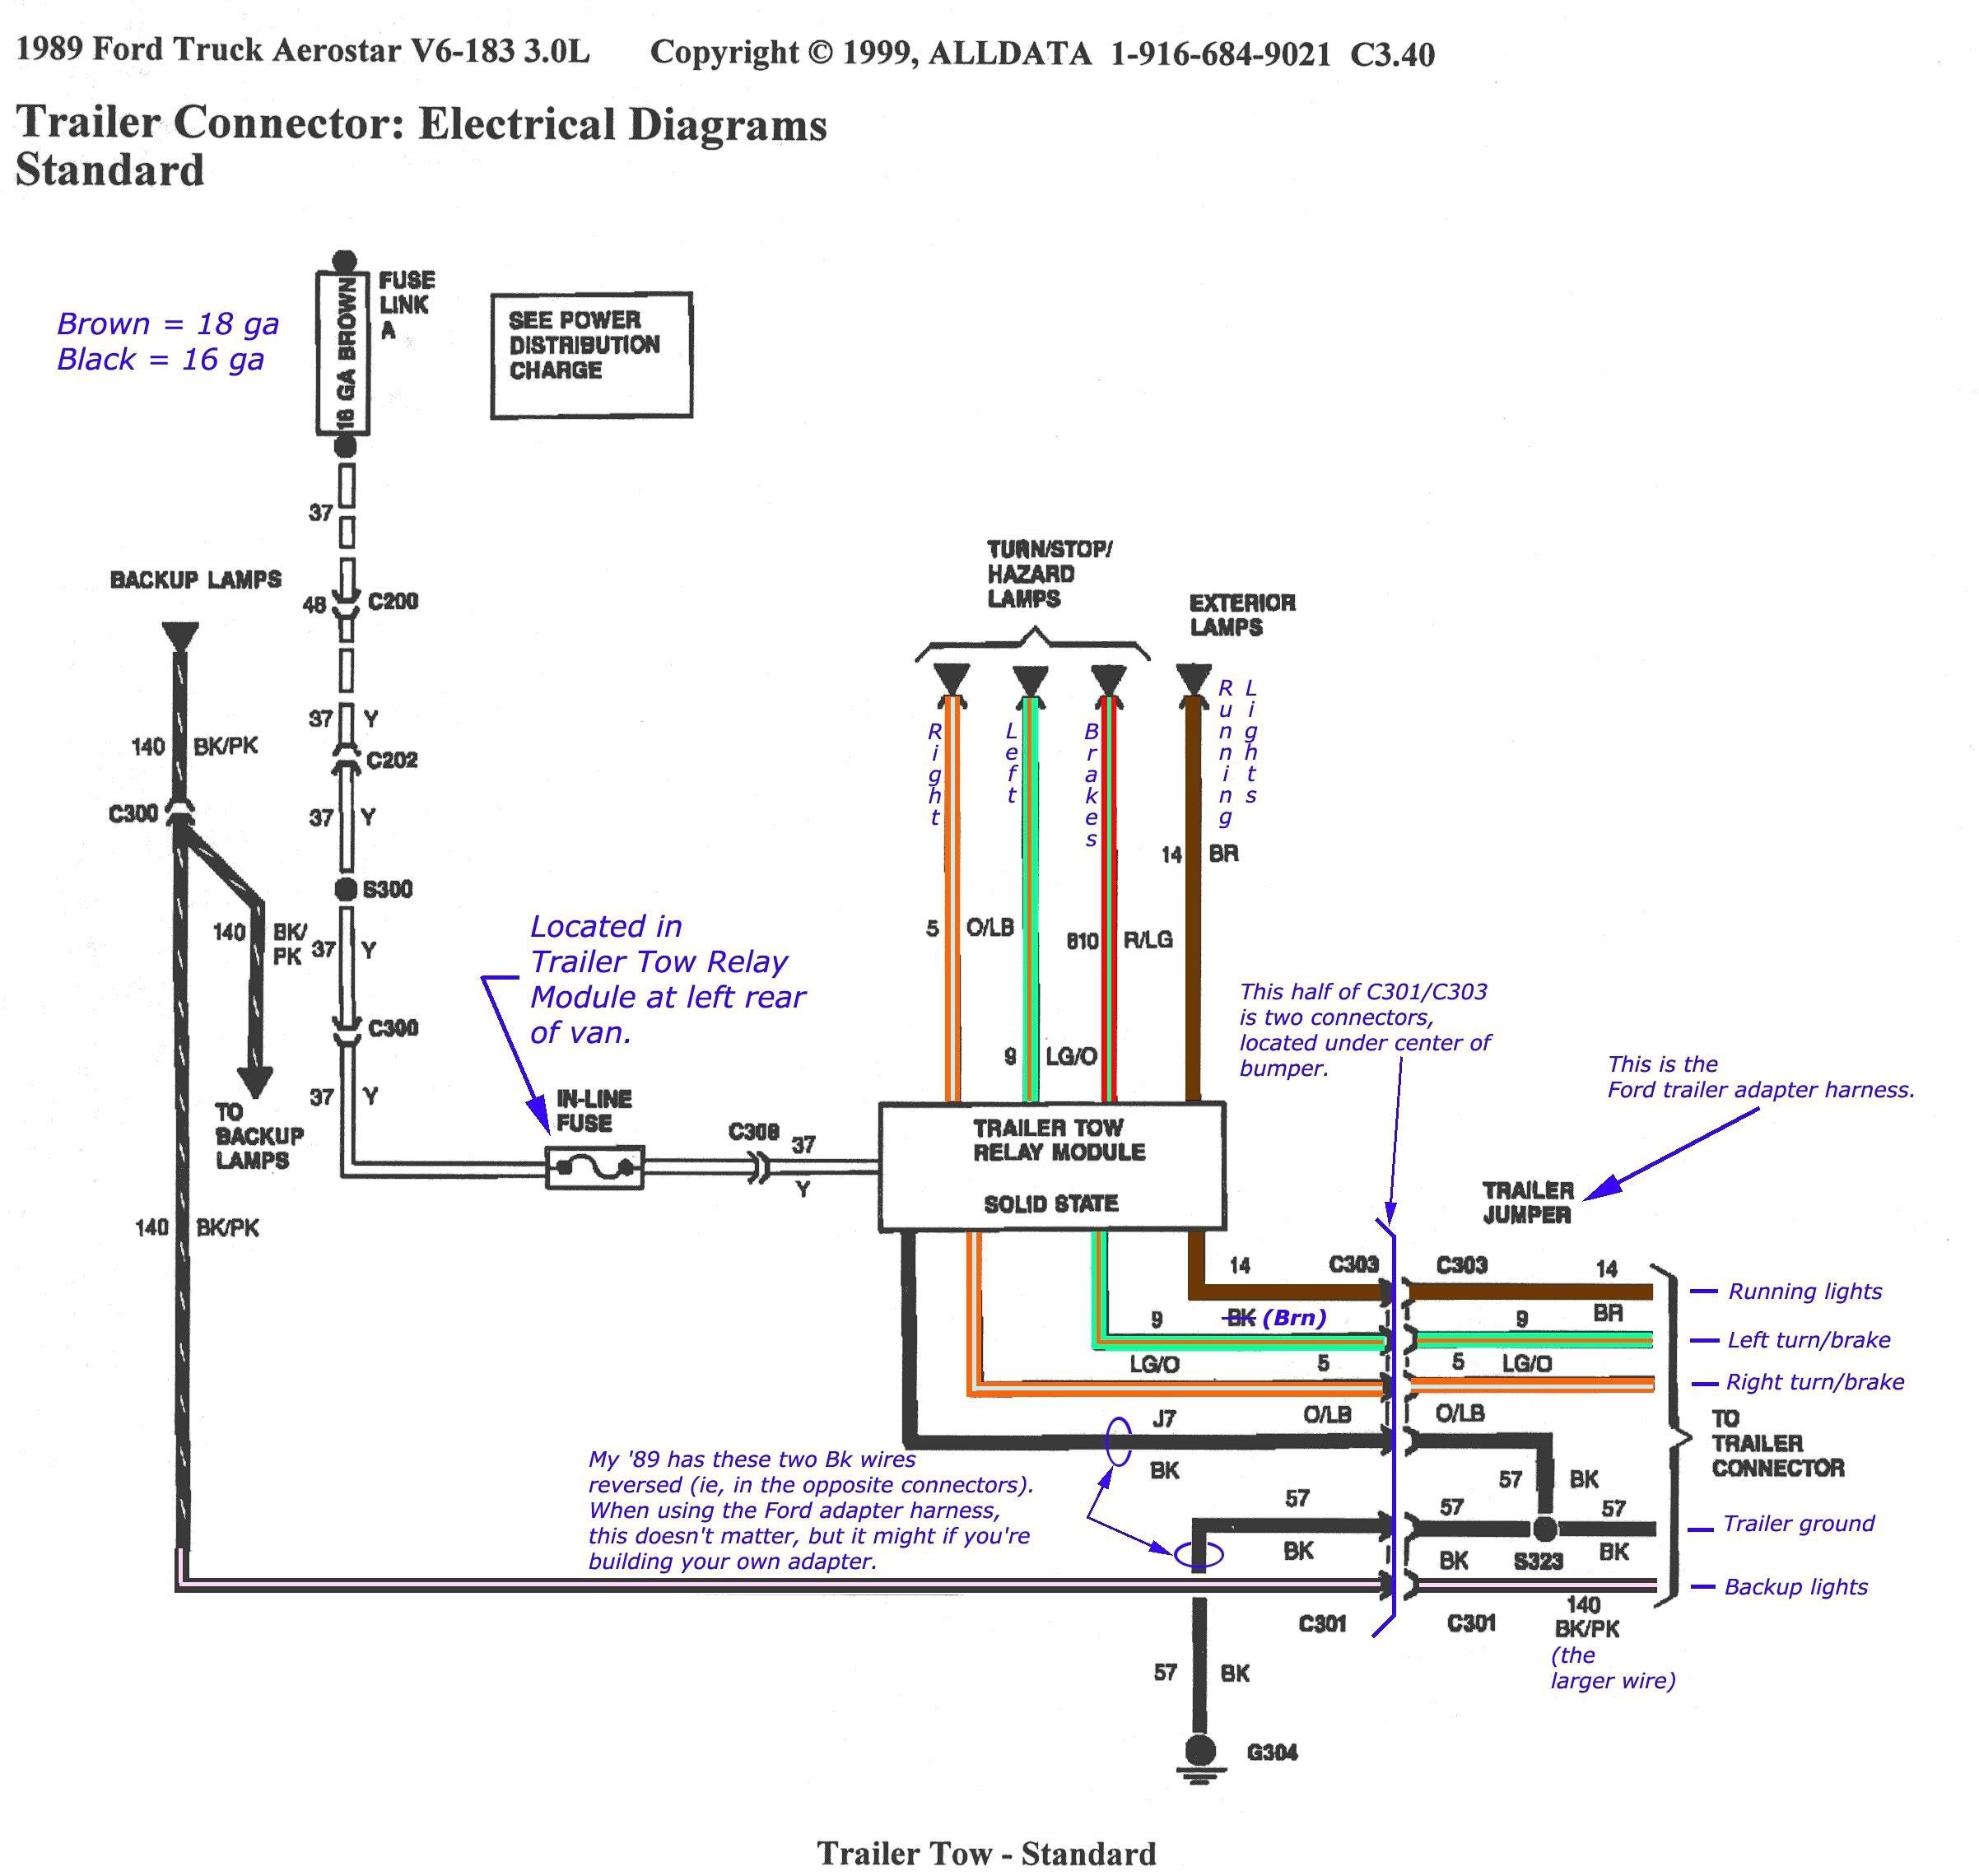 Motor Contactor Wiring Diagram ford F650 Abs Wiring Diagram Of Motor Contactor Wiring Diagram